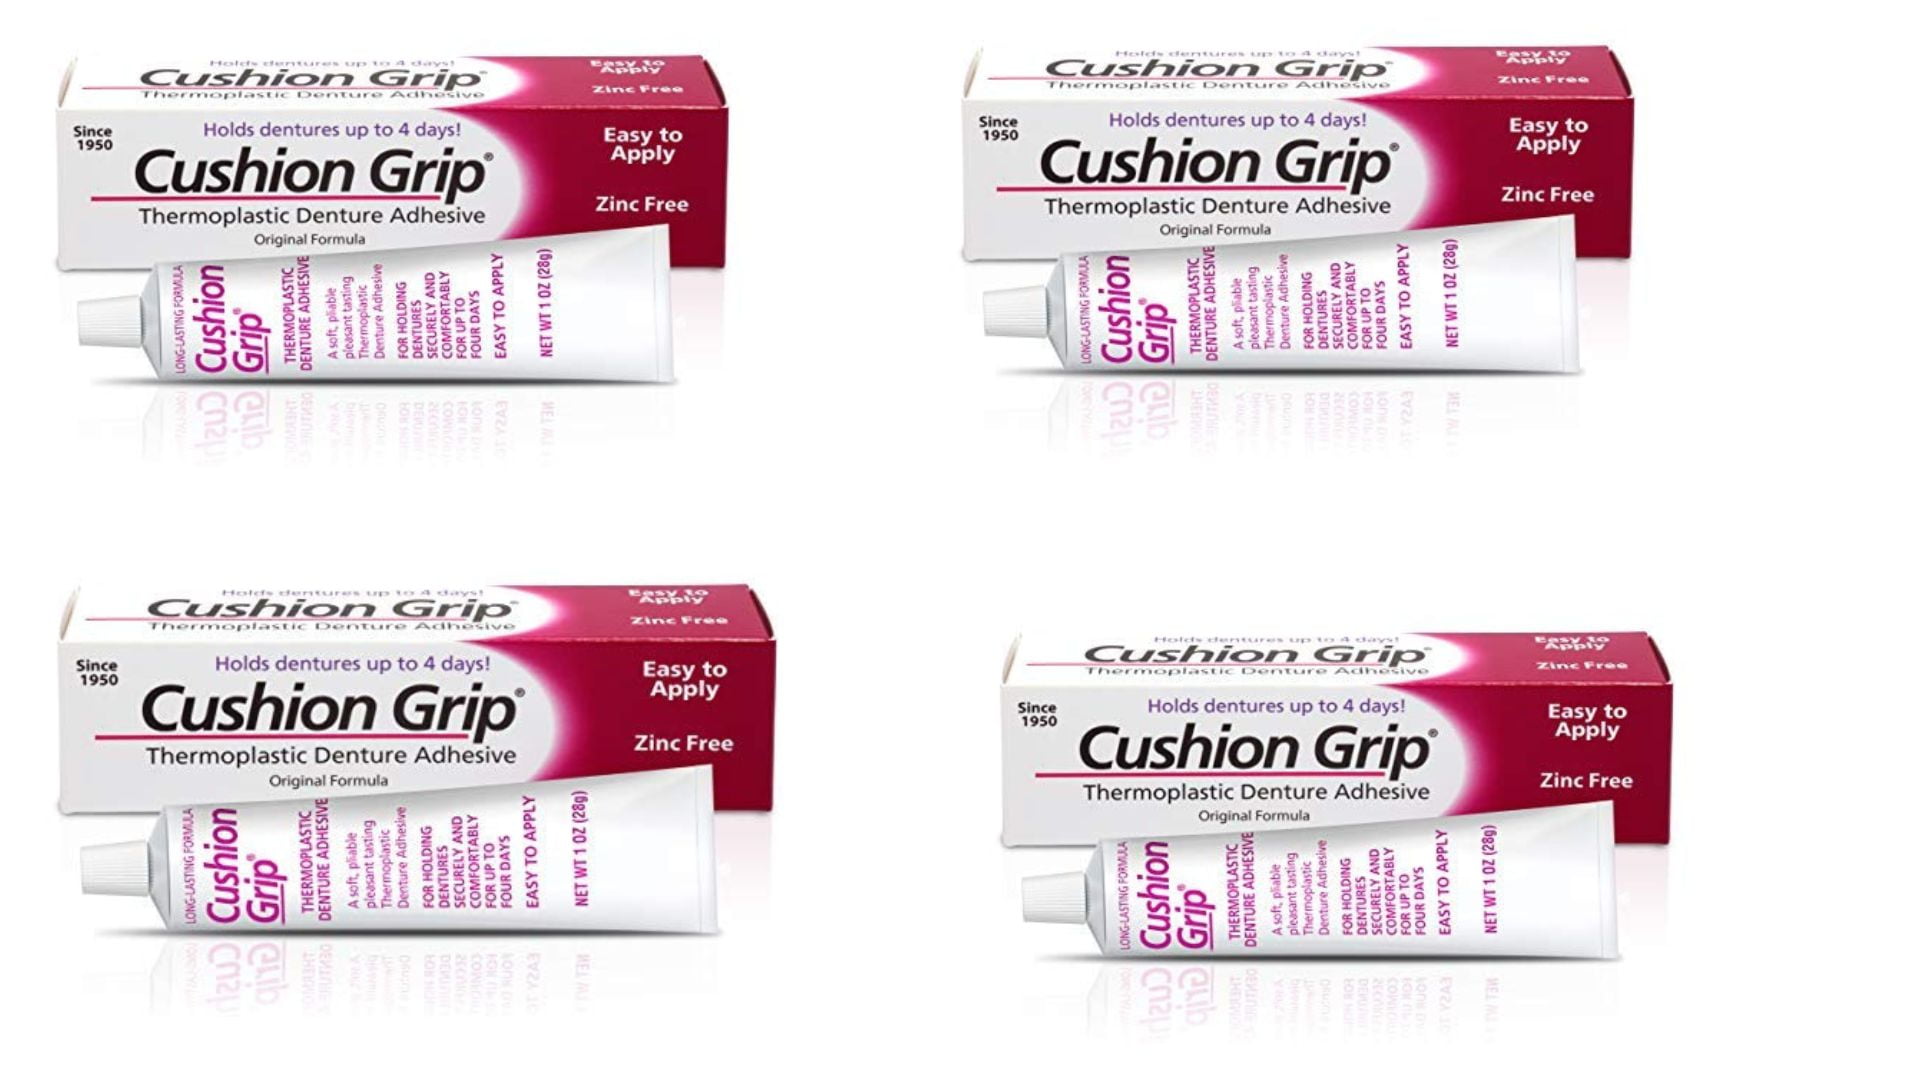 A Denture Adhesive that Improves the Fit and Comfort of Your Dentures. – My  Cushion Grip